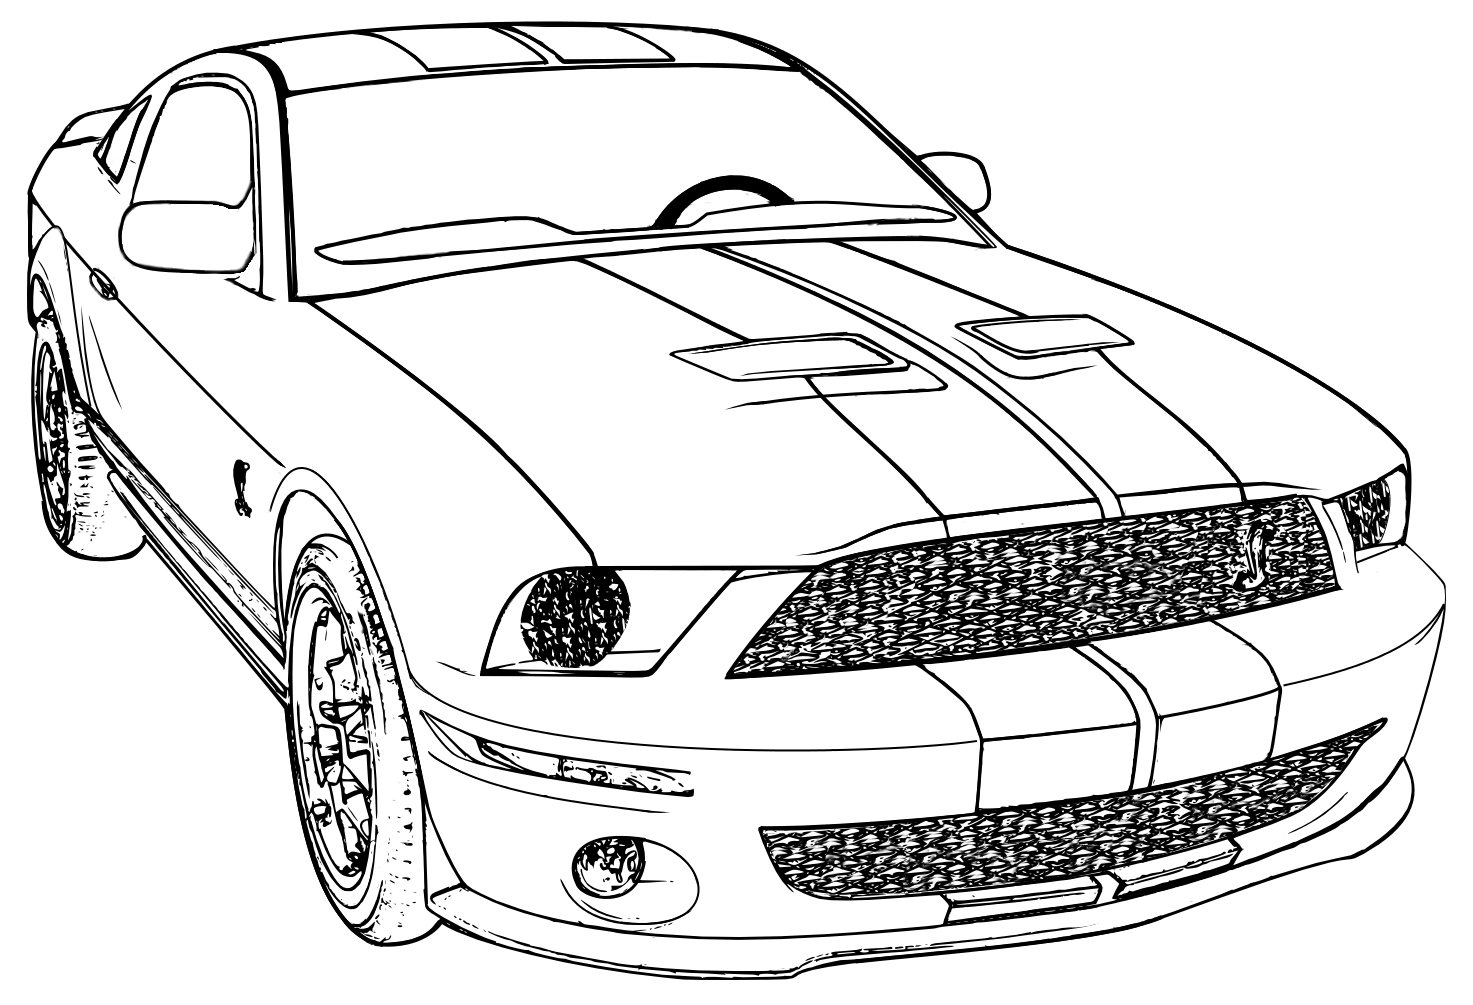 Ford coloring pages to download and print for free